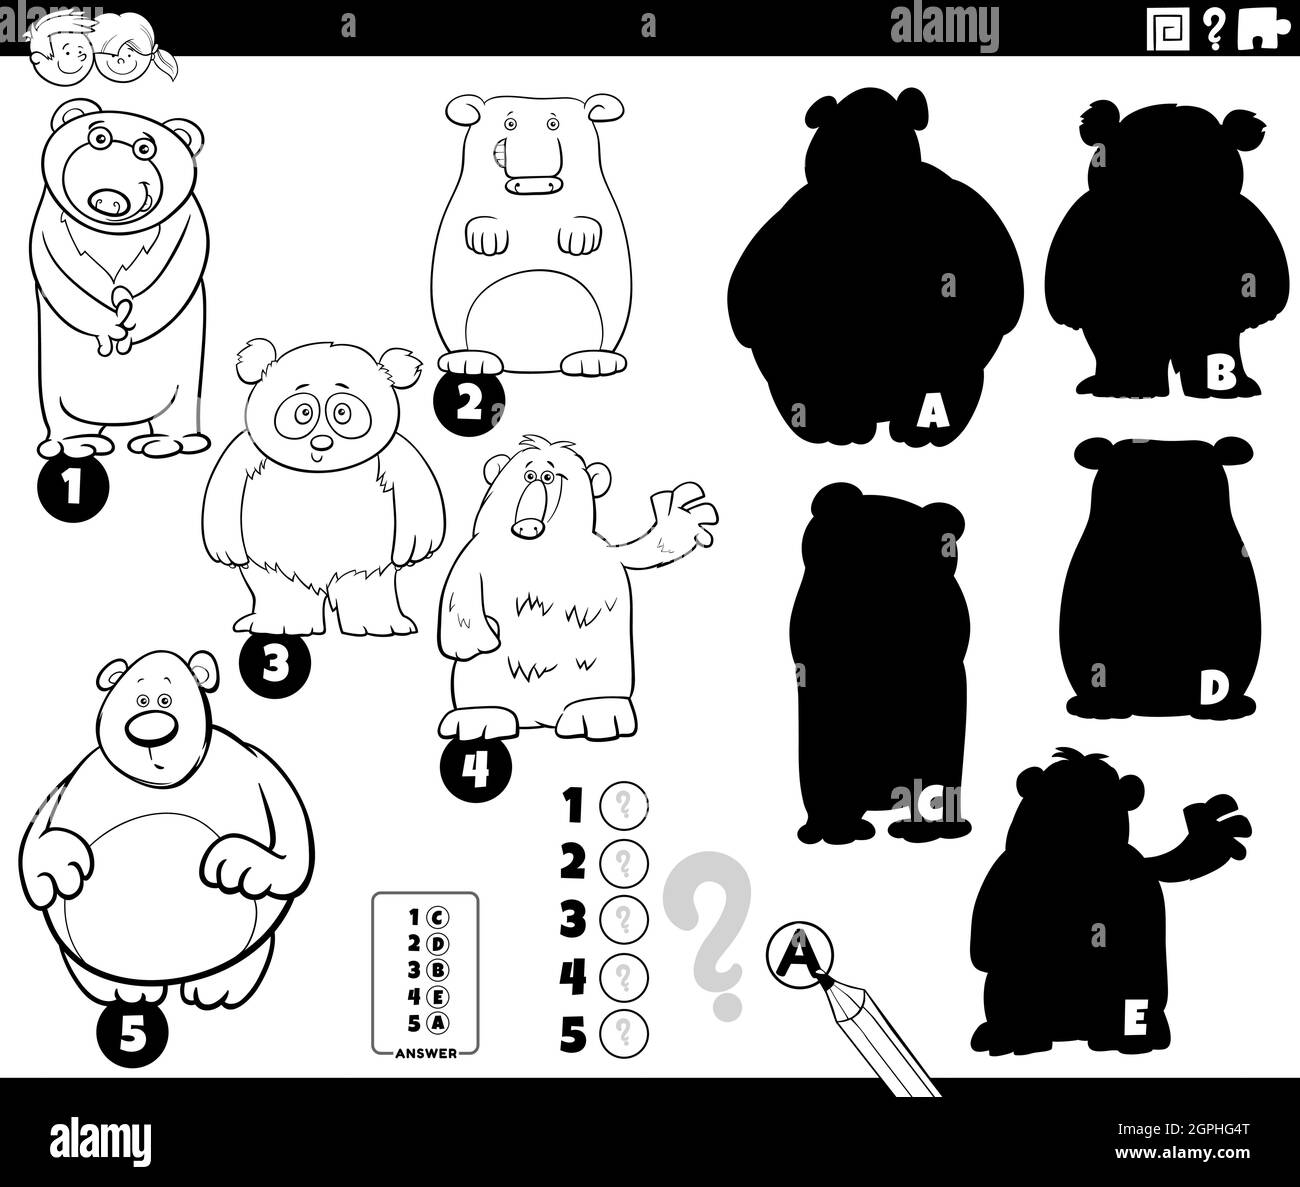 shadows game with bears characters coloring book page Stock Vector